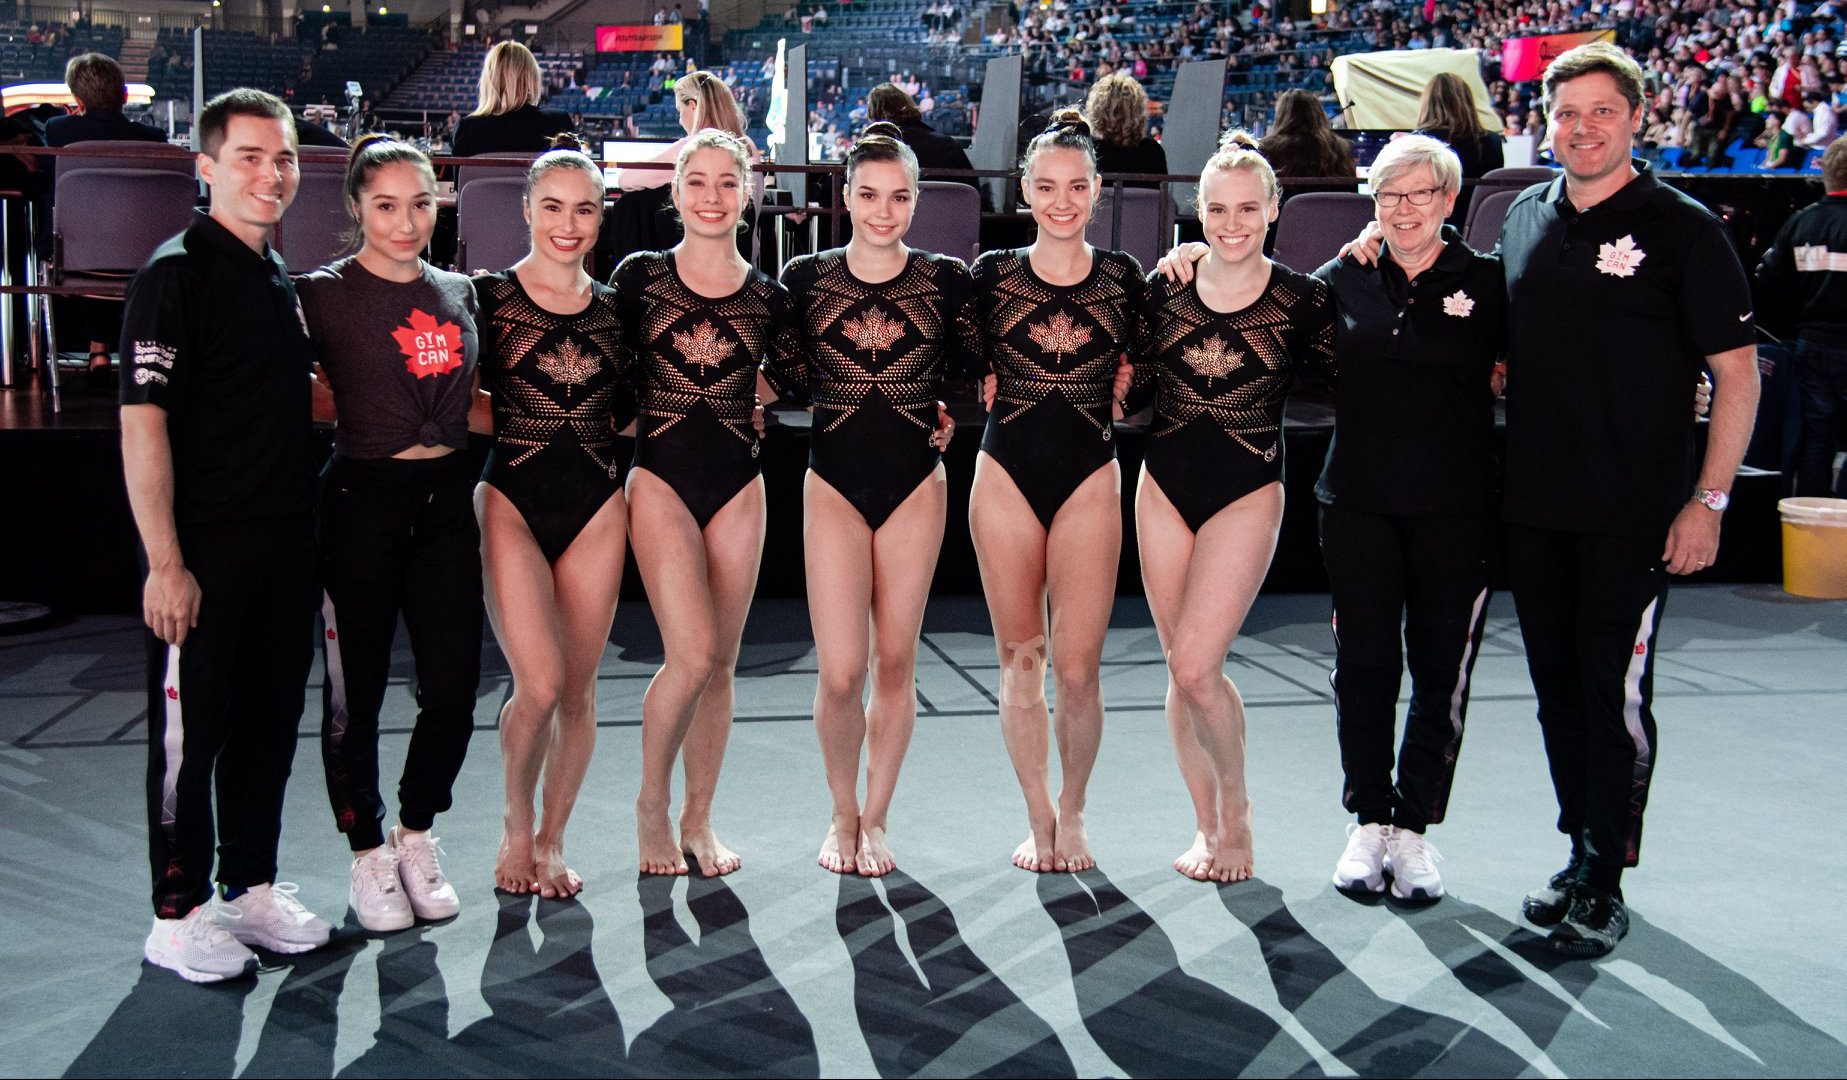 Women's Artistic Gymnastics secure Tokyo 2020 qualification - Team Canada -  Official Olympic Team Website